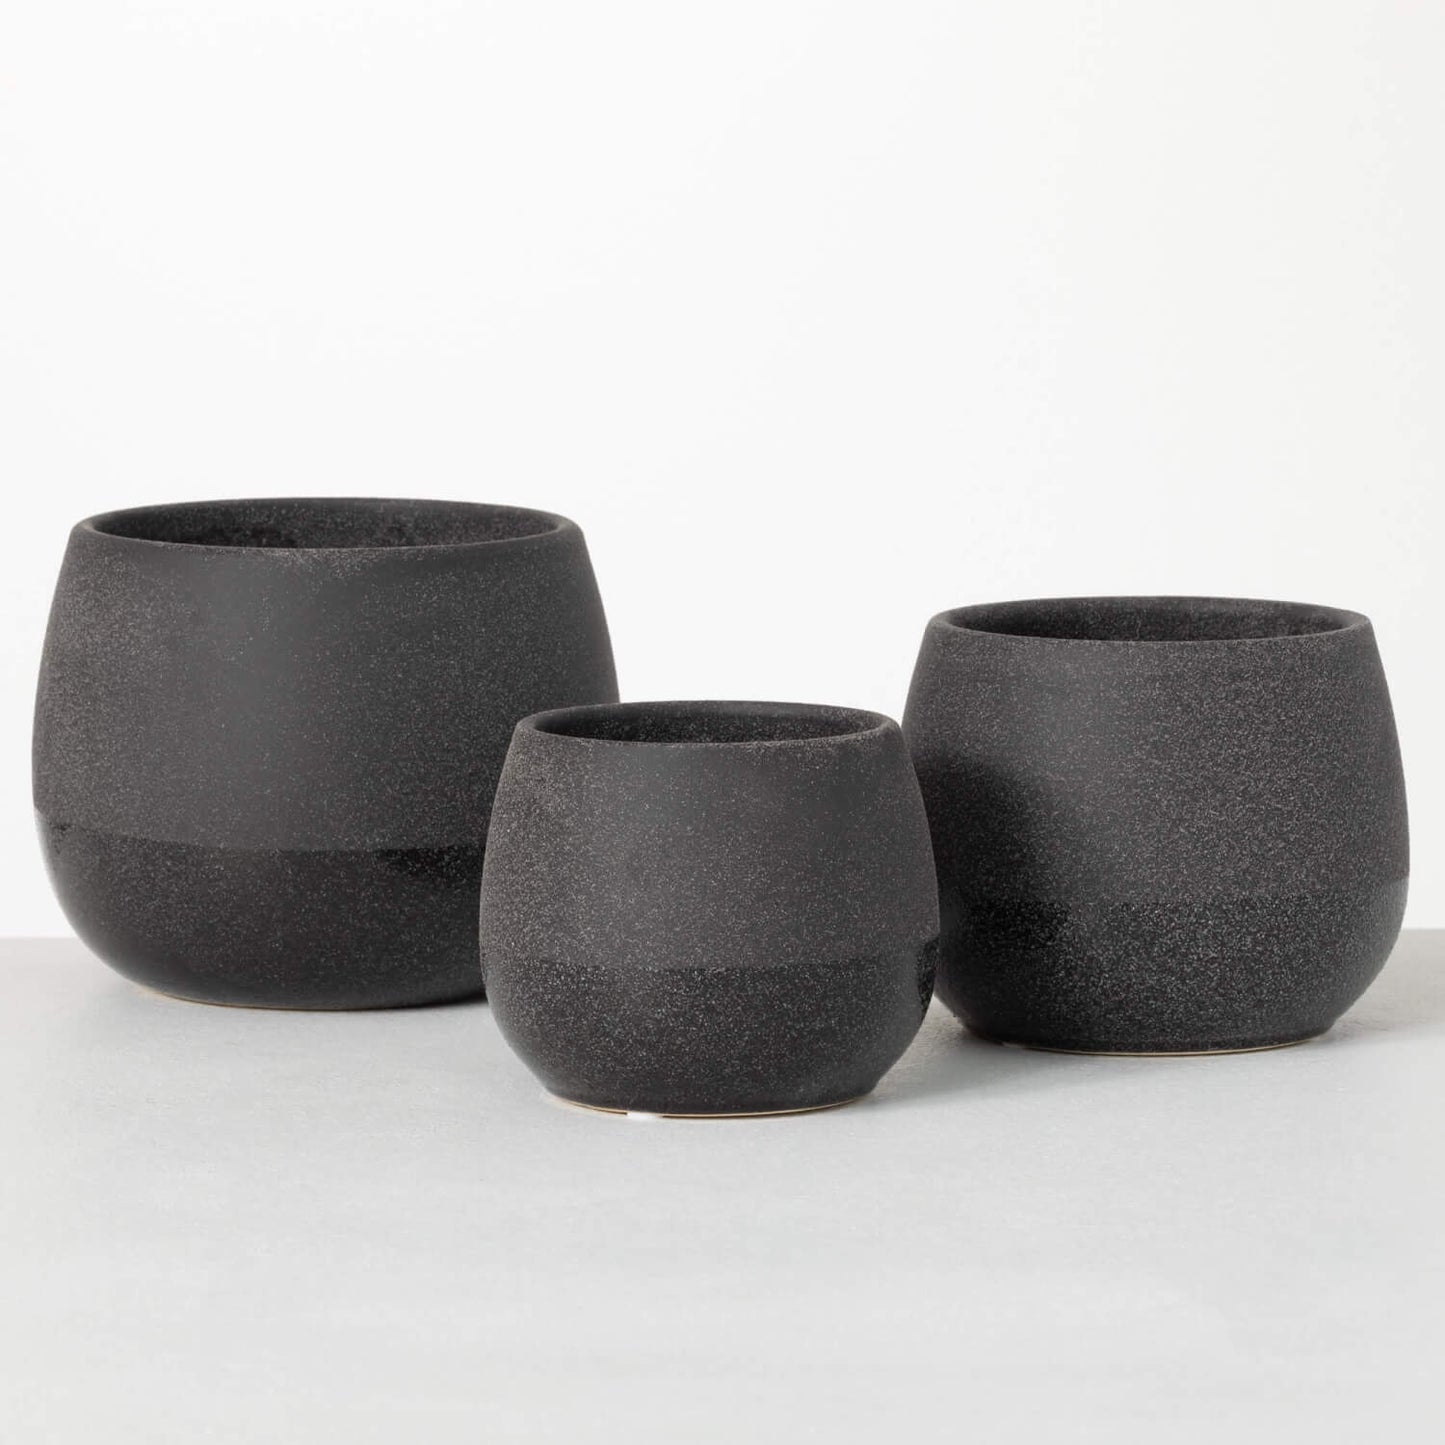 SPECKLED BLACK TWO-TONED POTS